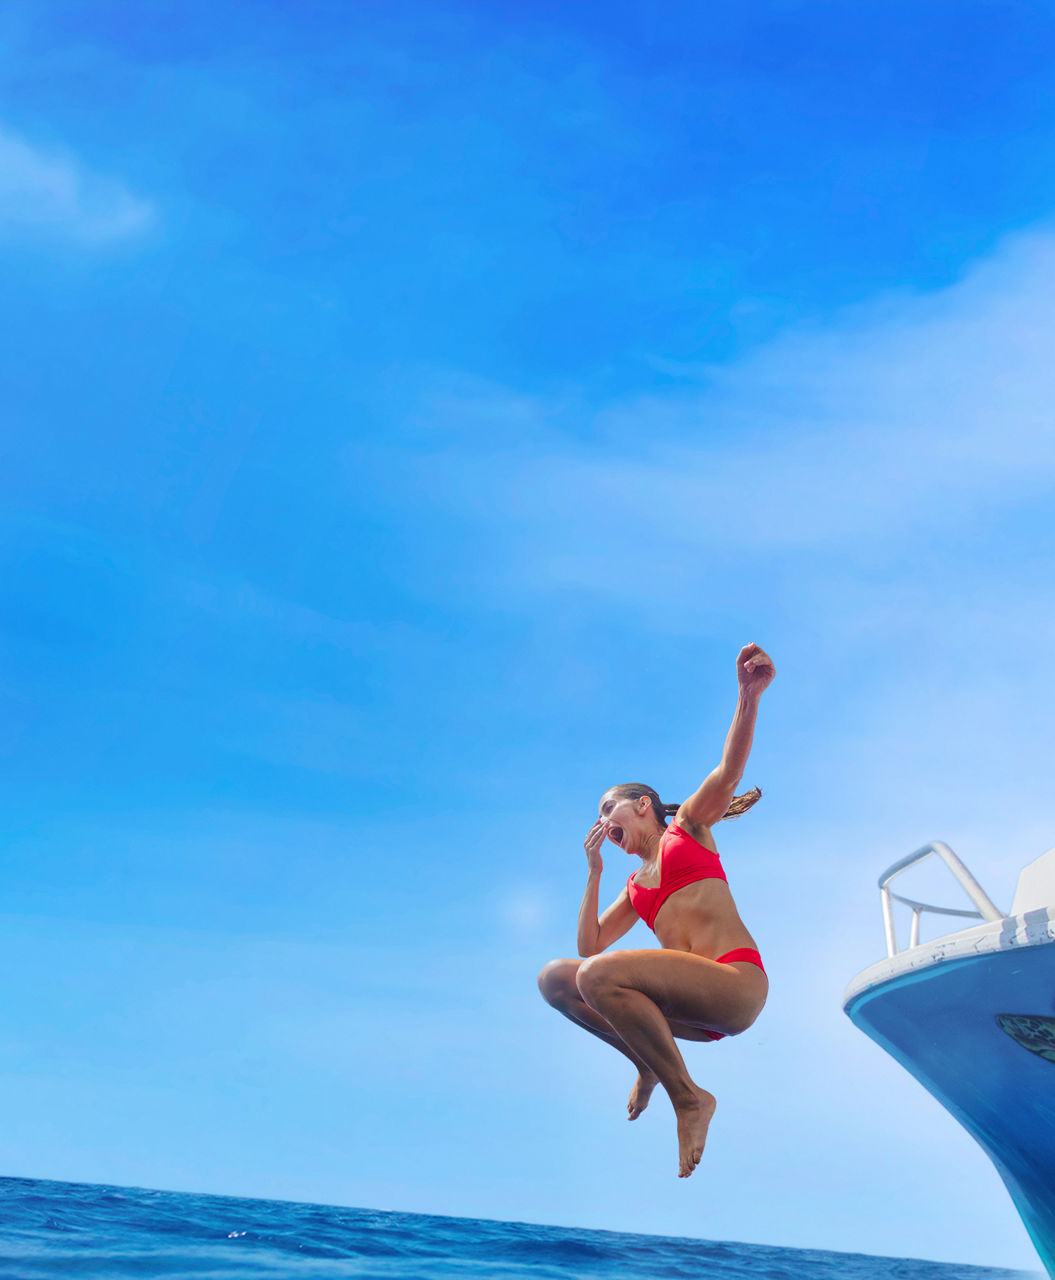 Girls jumping from boat, Cozumel, Mexico | HP Mobile